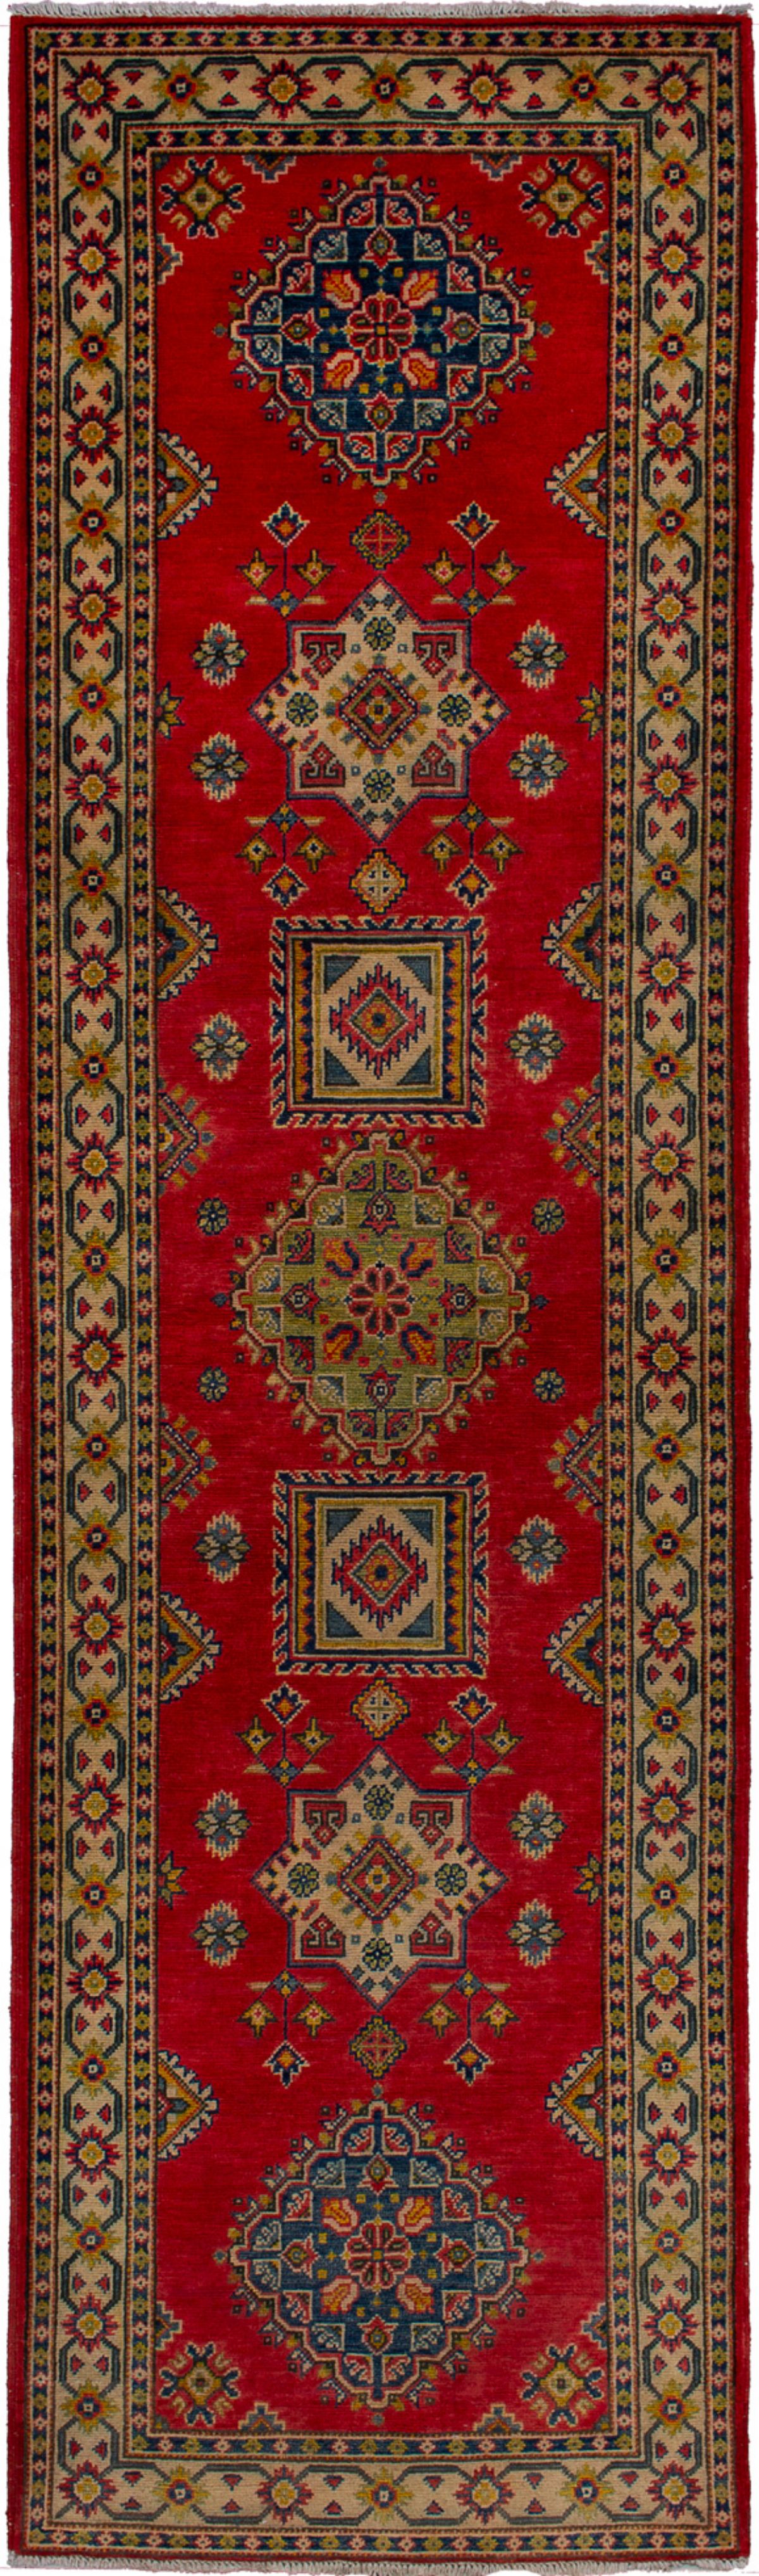 Hand-knotted Finest Gazni Red Wool Rug 2'10" x 10'0" Size: 2'10" x 10'0"  